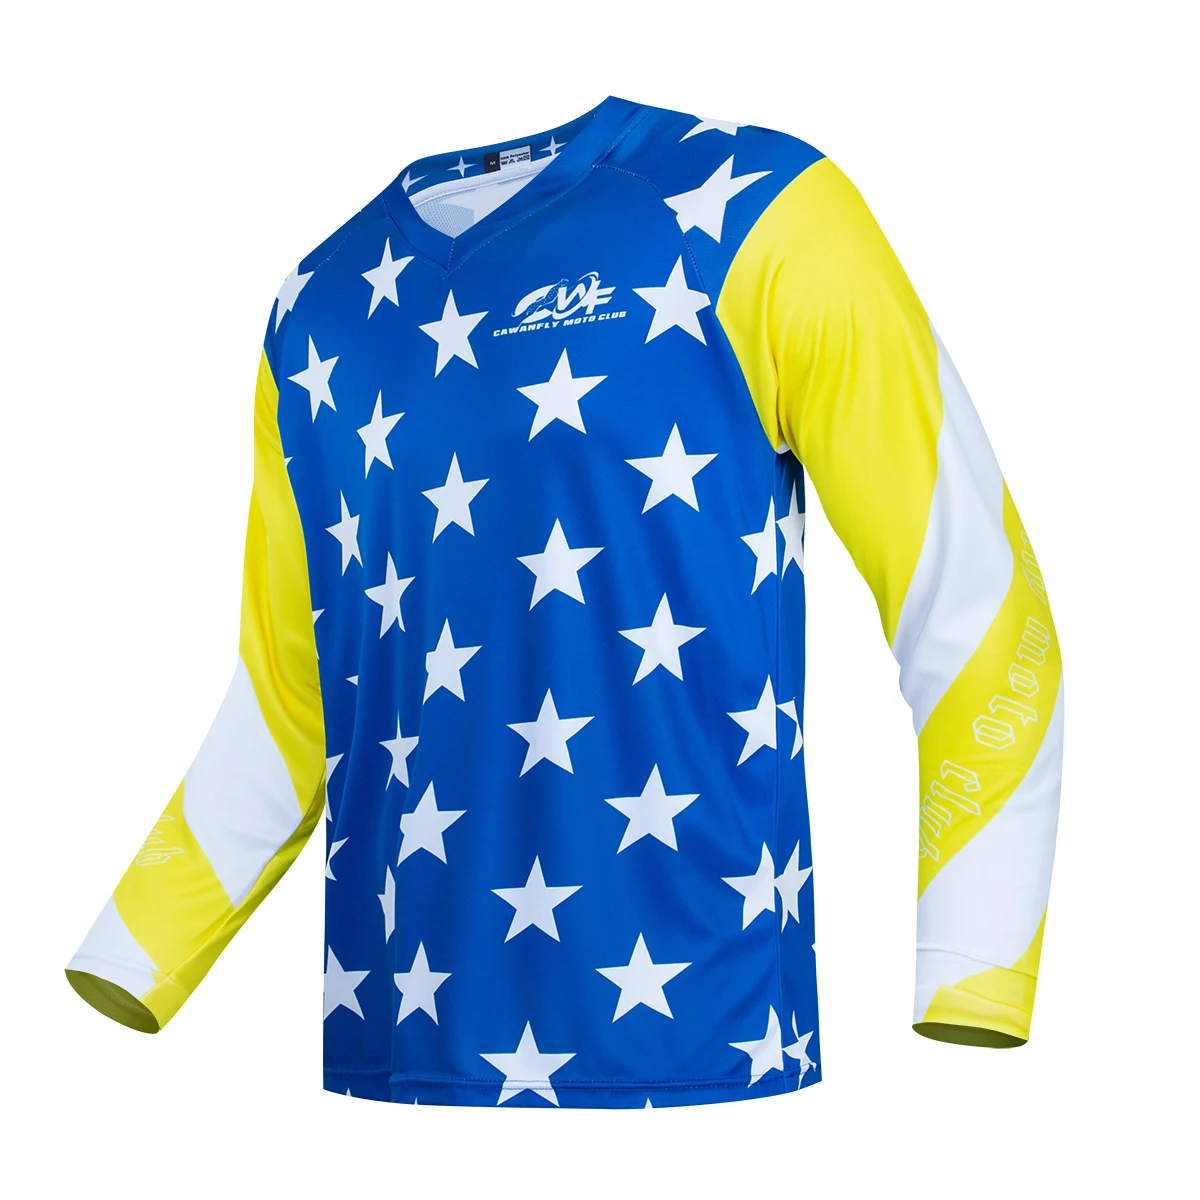 Customized sublimation quick-drying and breathable Men's cycling jers Bike Bicycle Cycling Wear Clothing Uiforms Cycling Jerseys